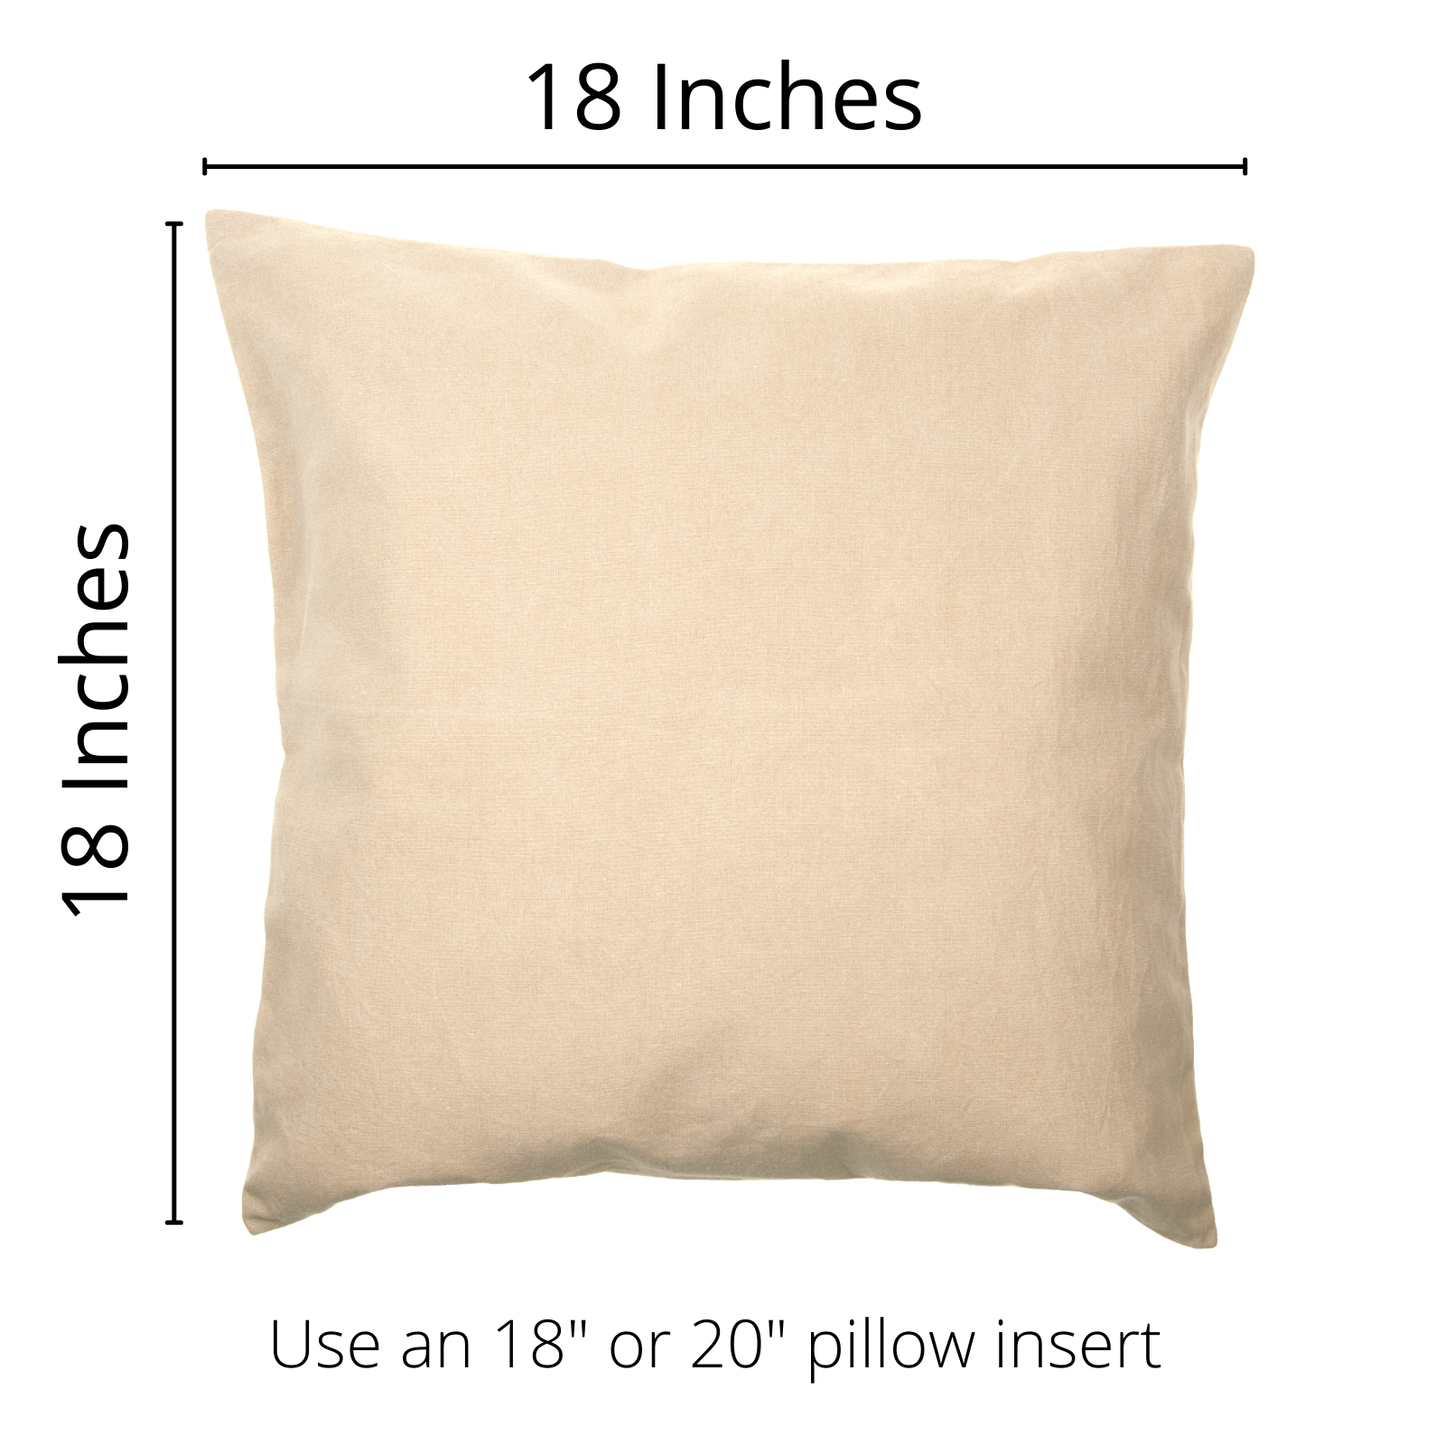 Personalized Proud to Serve Pillow Cover